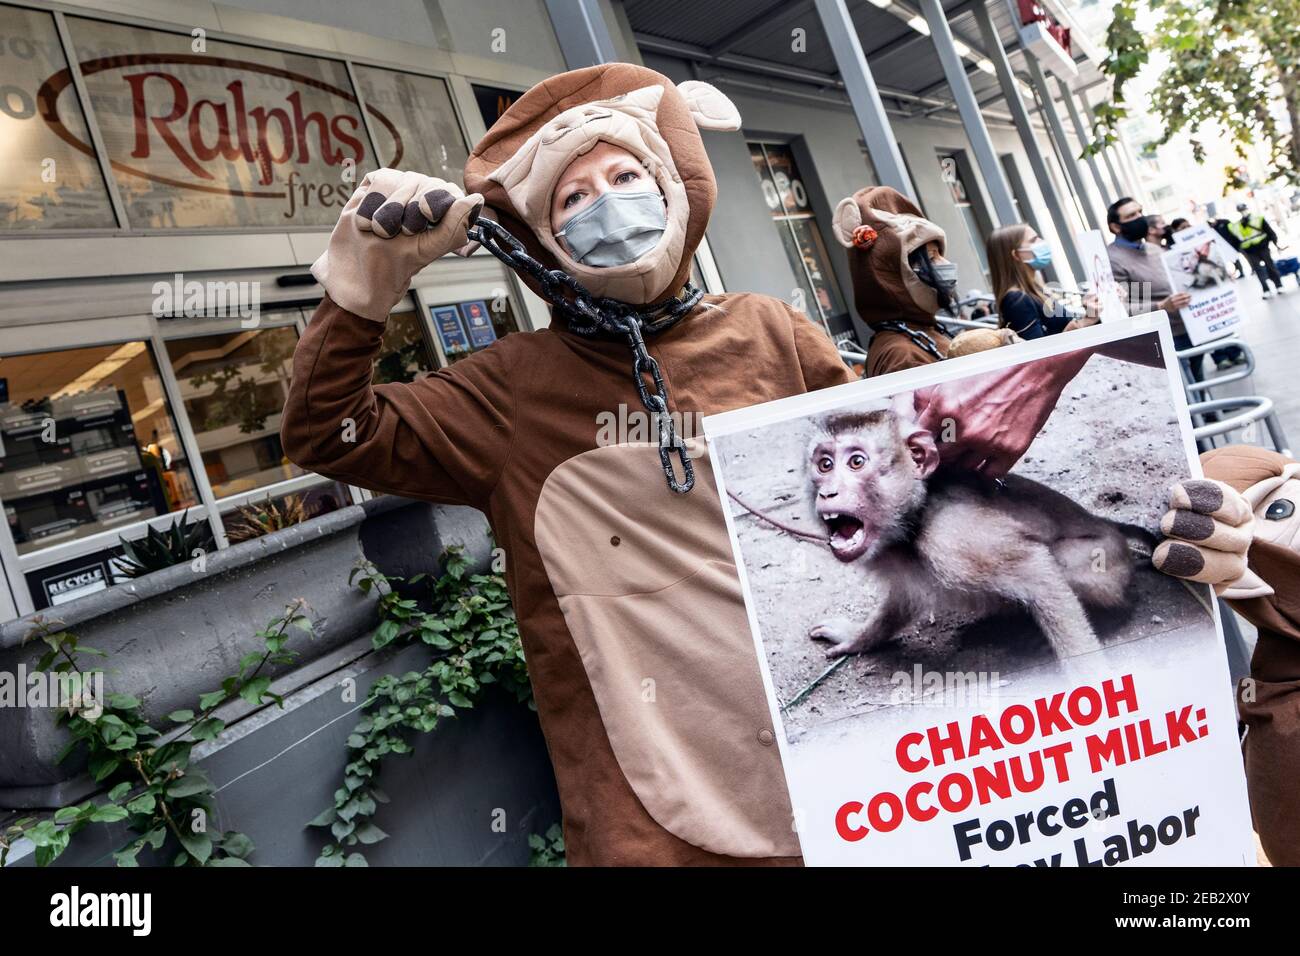 Los Angeles, United States. 11th Feb, 2021. PETA activists dressed in monkey costumes hold placards during a protest against Thailand's Chaokoh brand for allegedly forcing monkeys to climb up trees to collect coconuts and keeping them in cruel conditions. Major U.S. retailers such as Costco and Target stopped selling Chaokoh coconut milk over allegations of forced monkey labor. Credit: SOPA Images Limited/Alamy Live News Stock Photo